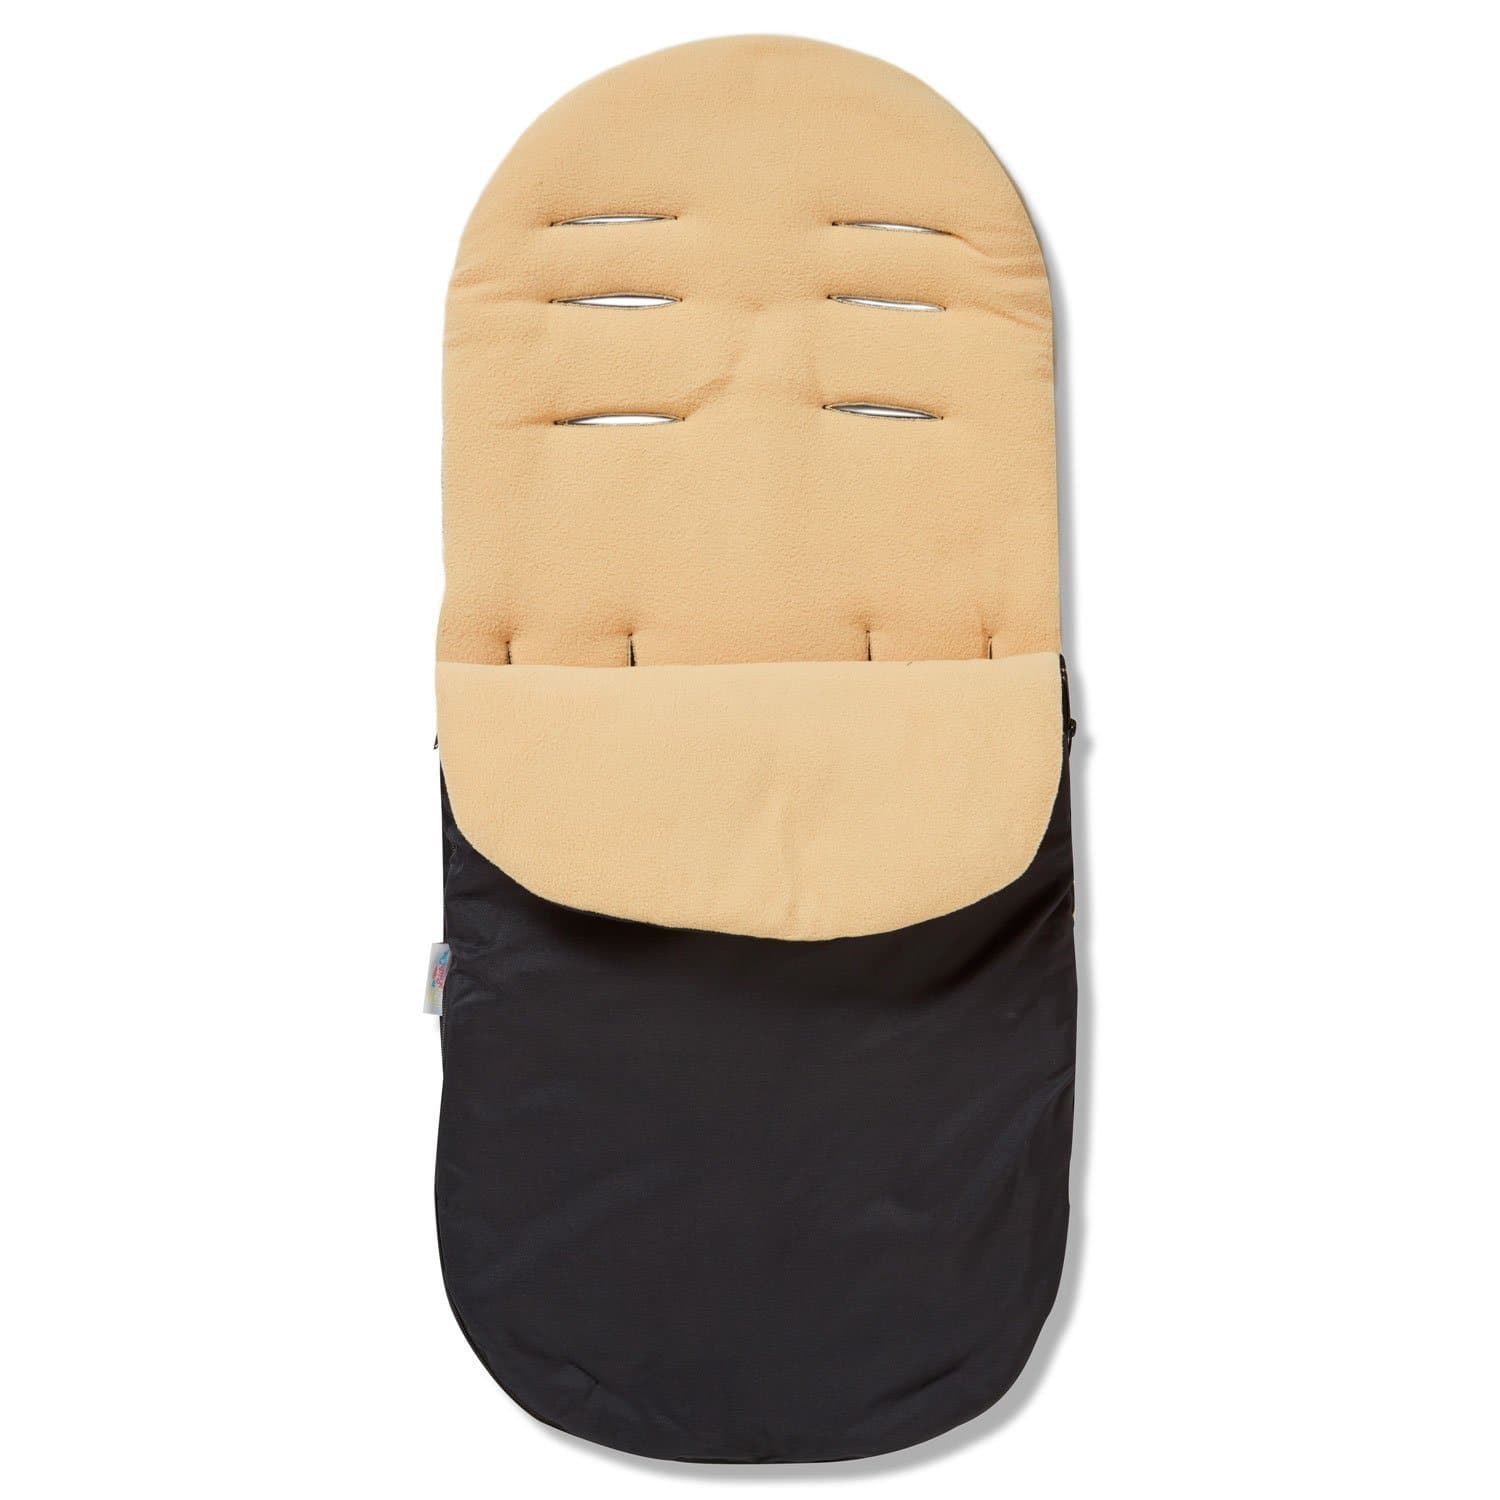 Footmuff / Cosy Toes Compatible with Inglesina - For Your Little One